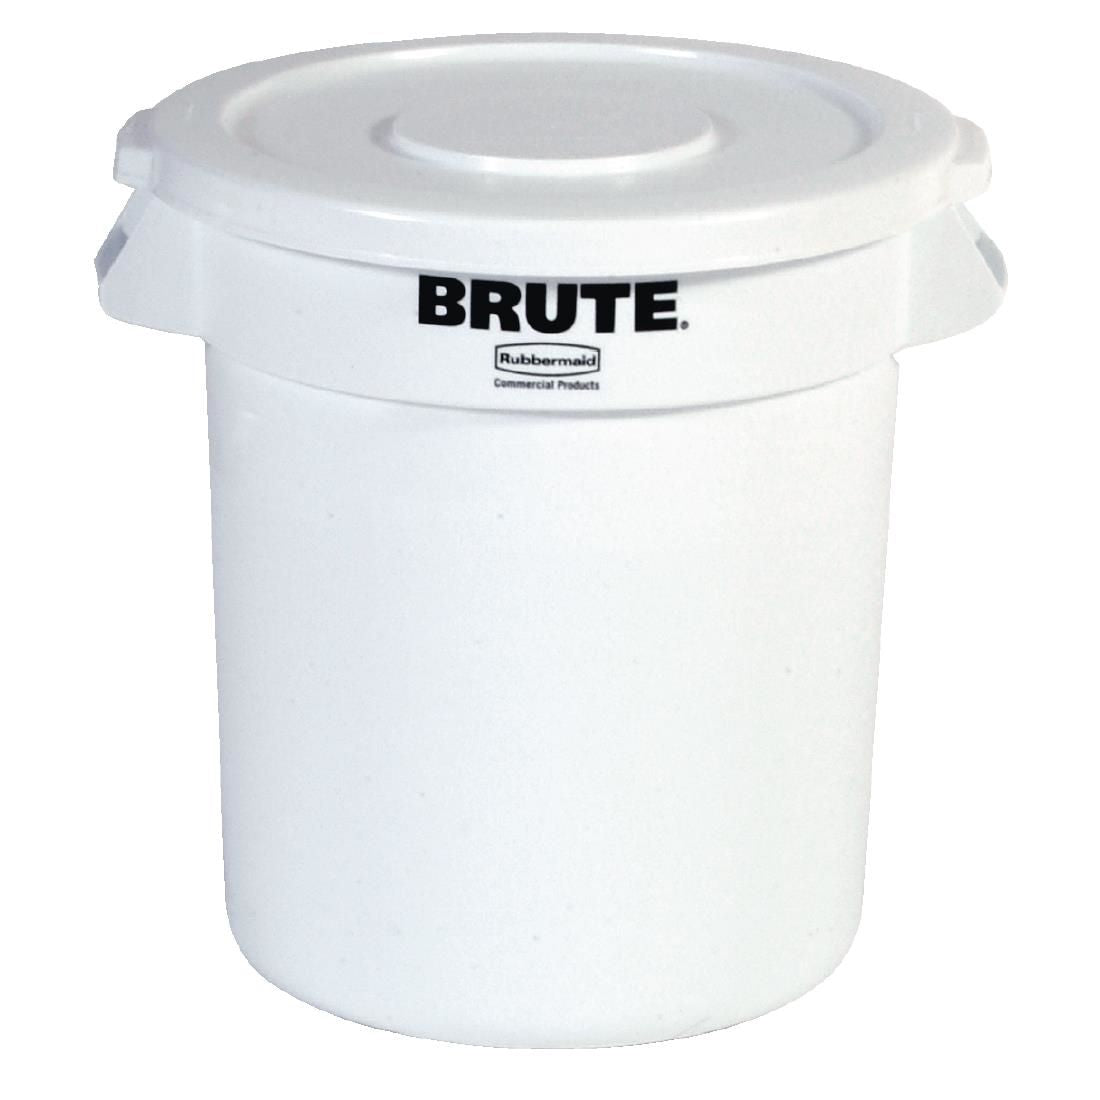 L653 Rubbermaid Round Brute Container 121Ltr Container White